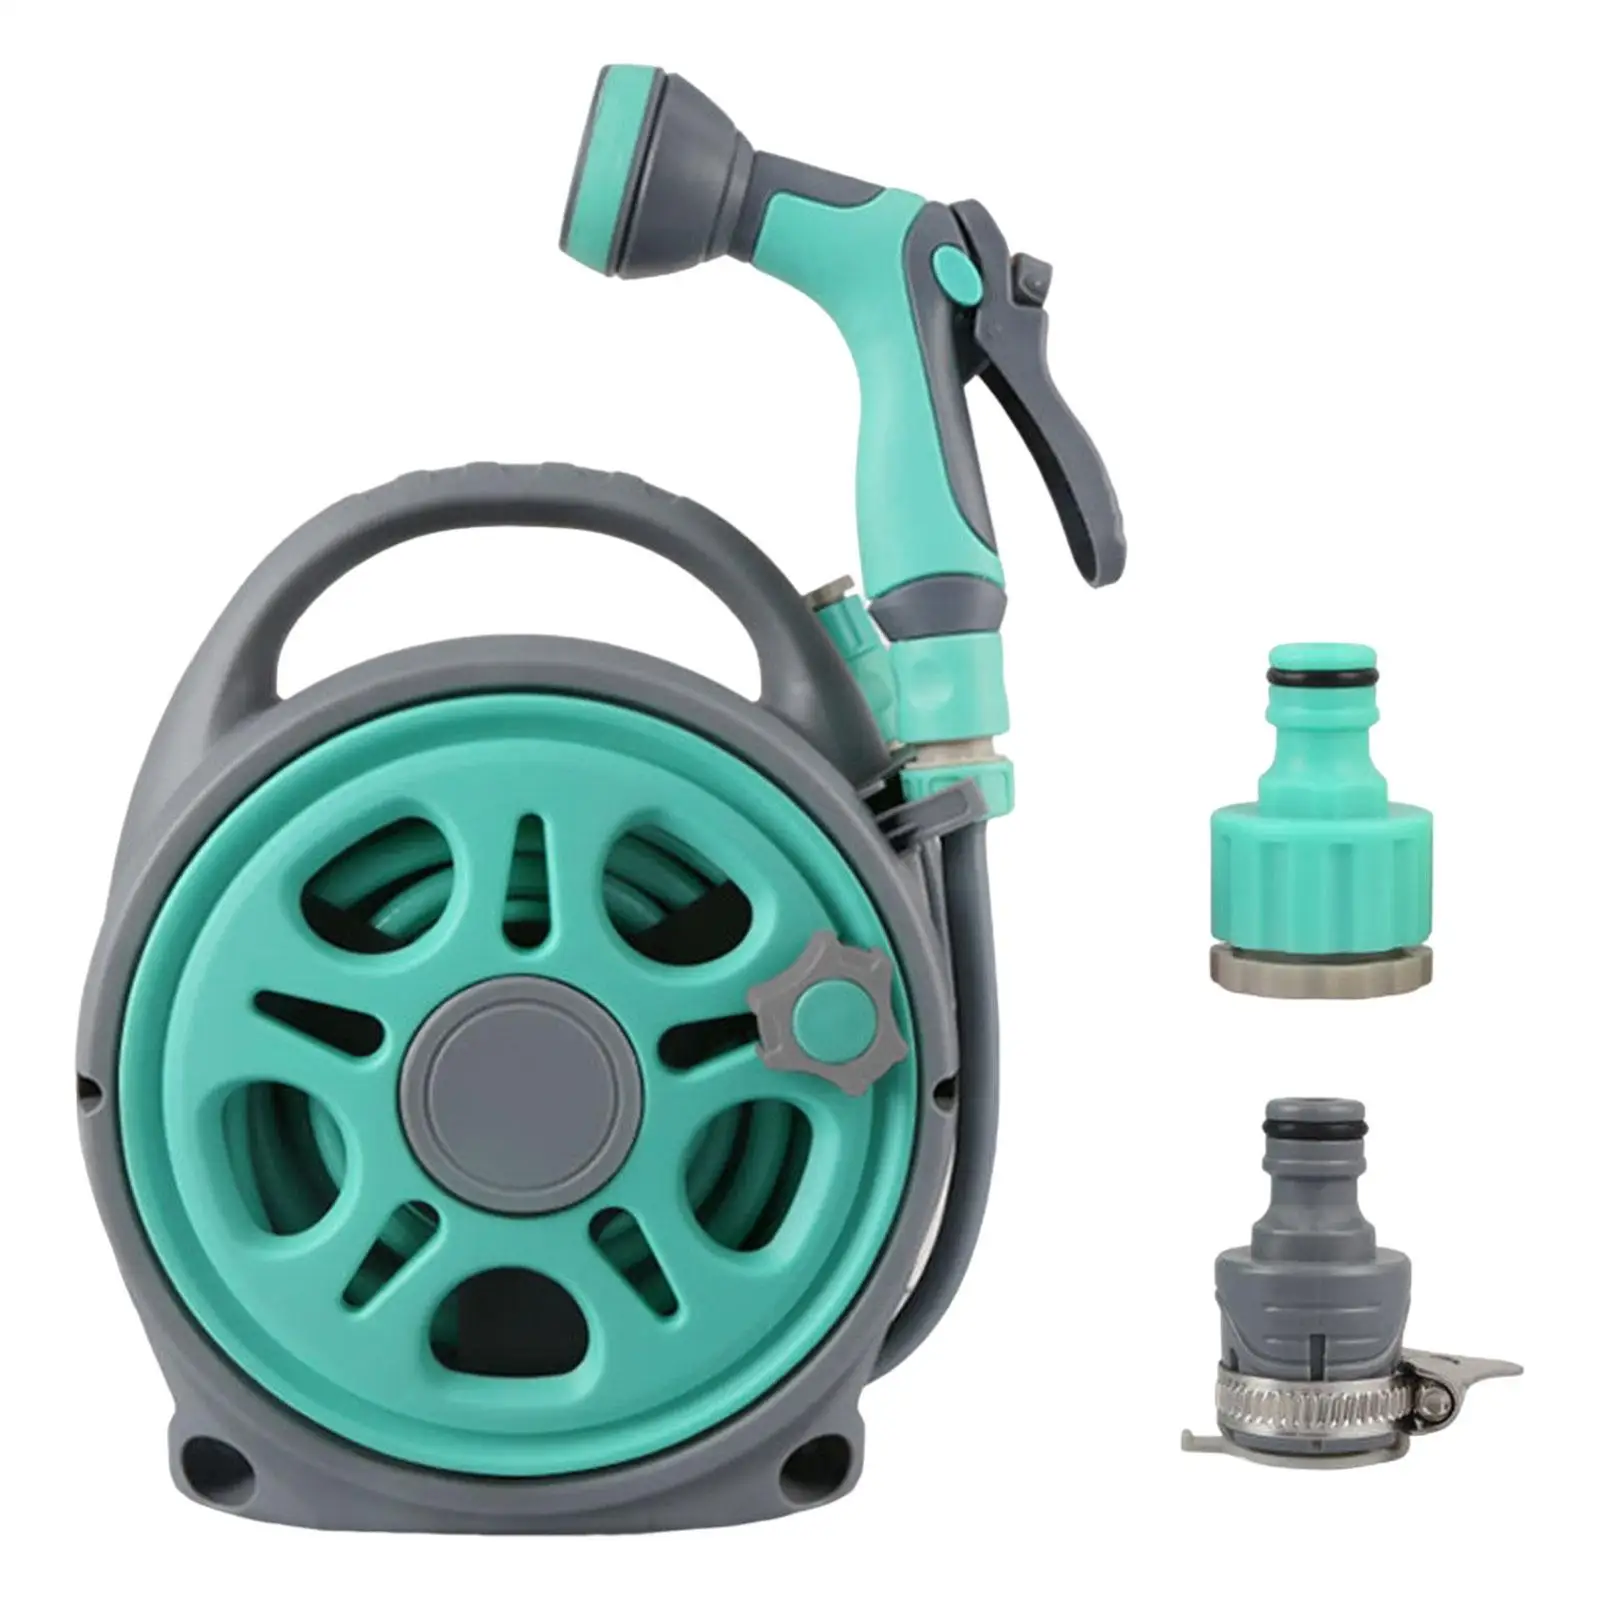 Portable Garden Hose Reel 7 Function Nozzle Heavy Duty 16M for Cleaning